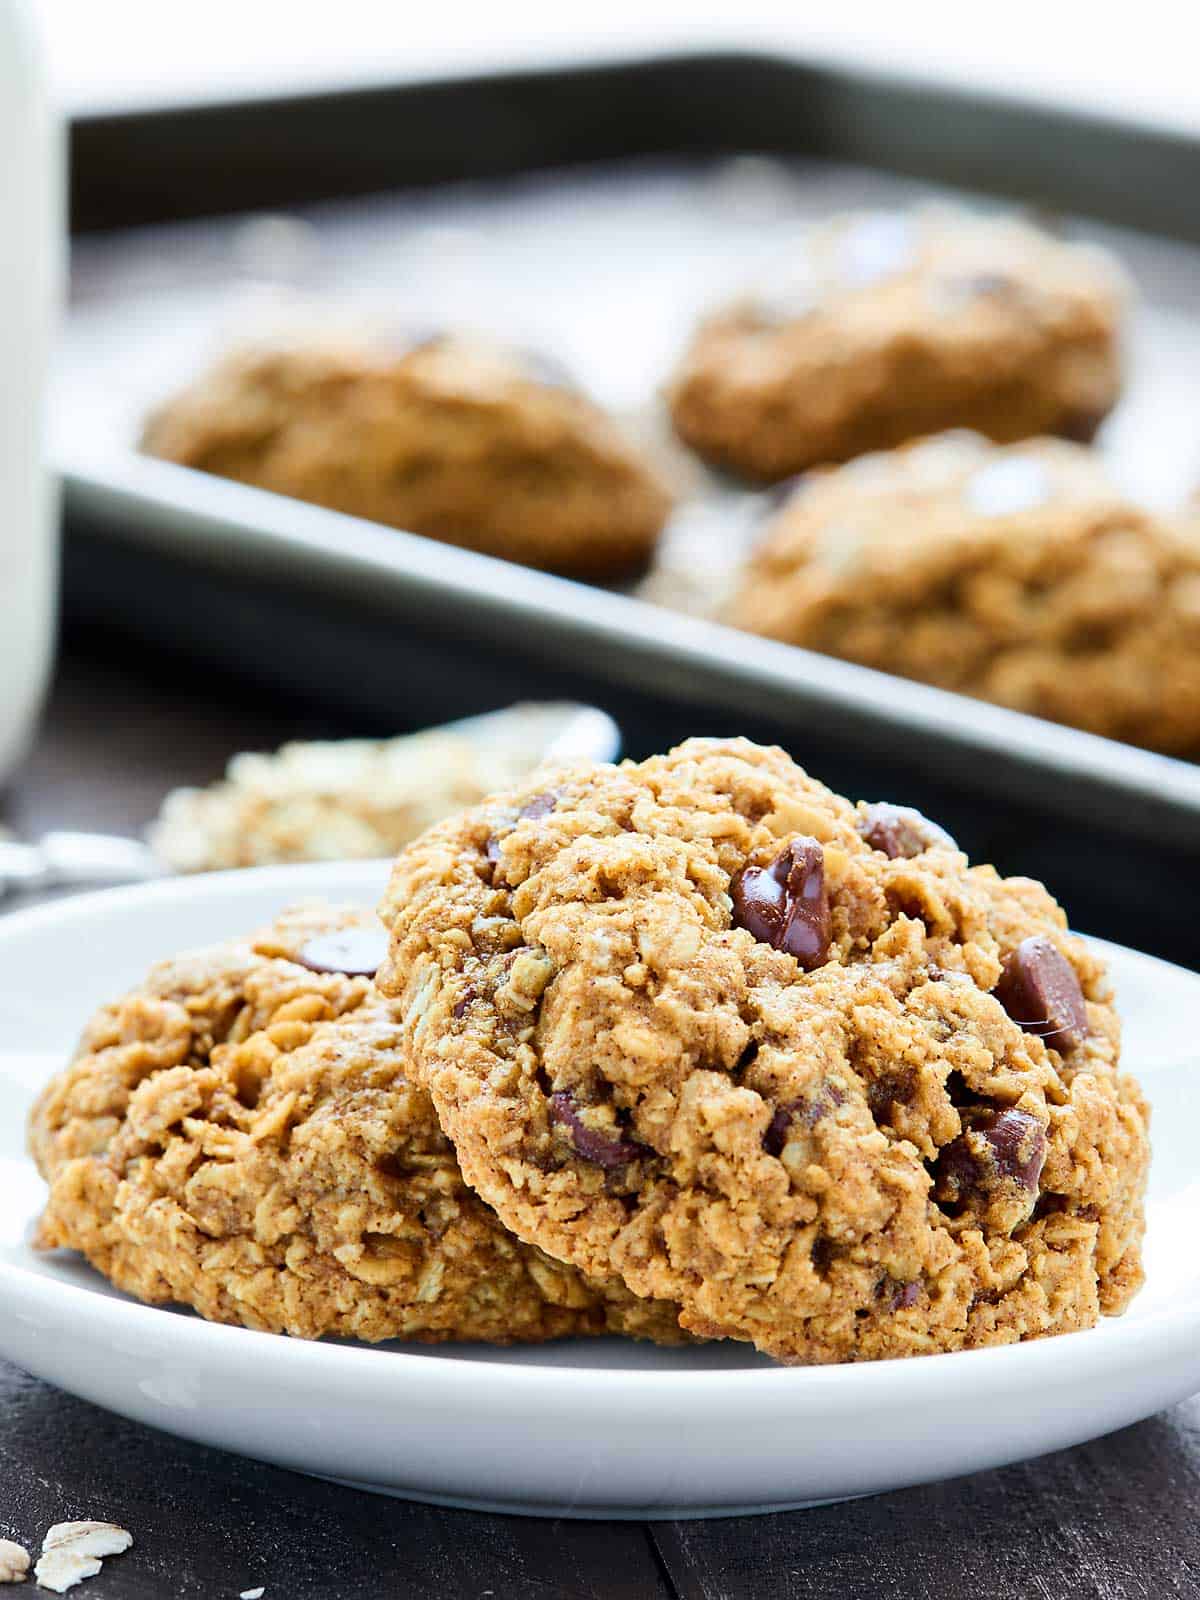 Oatmeal Chocolate Chip Cookies Recipe - Chewy & Easy!